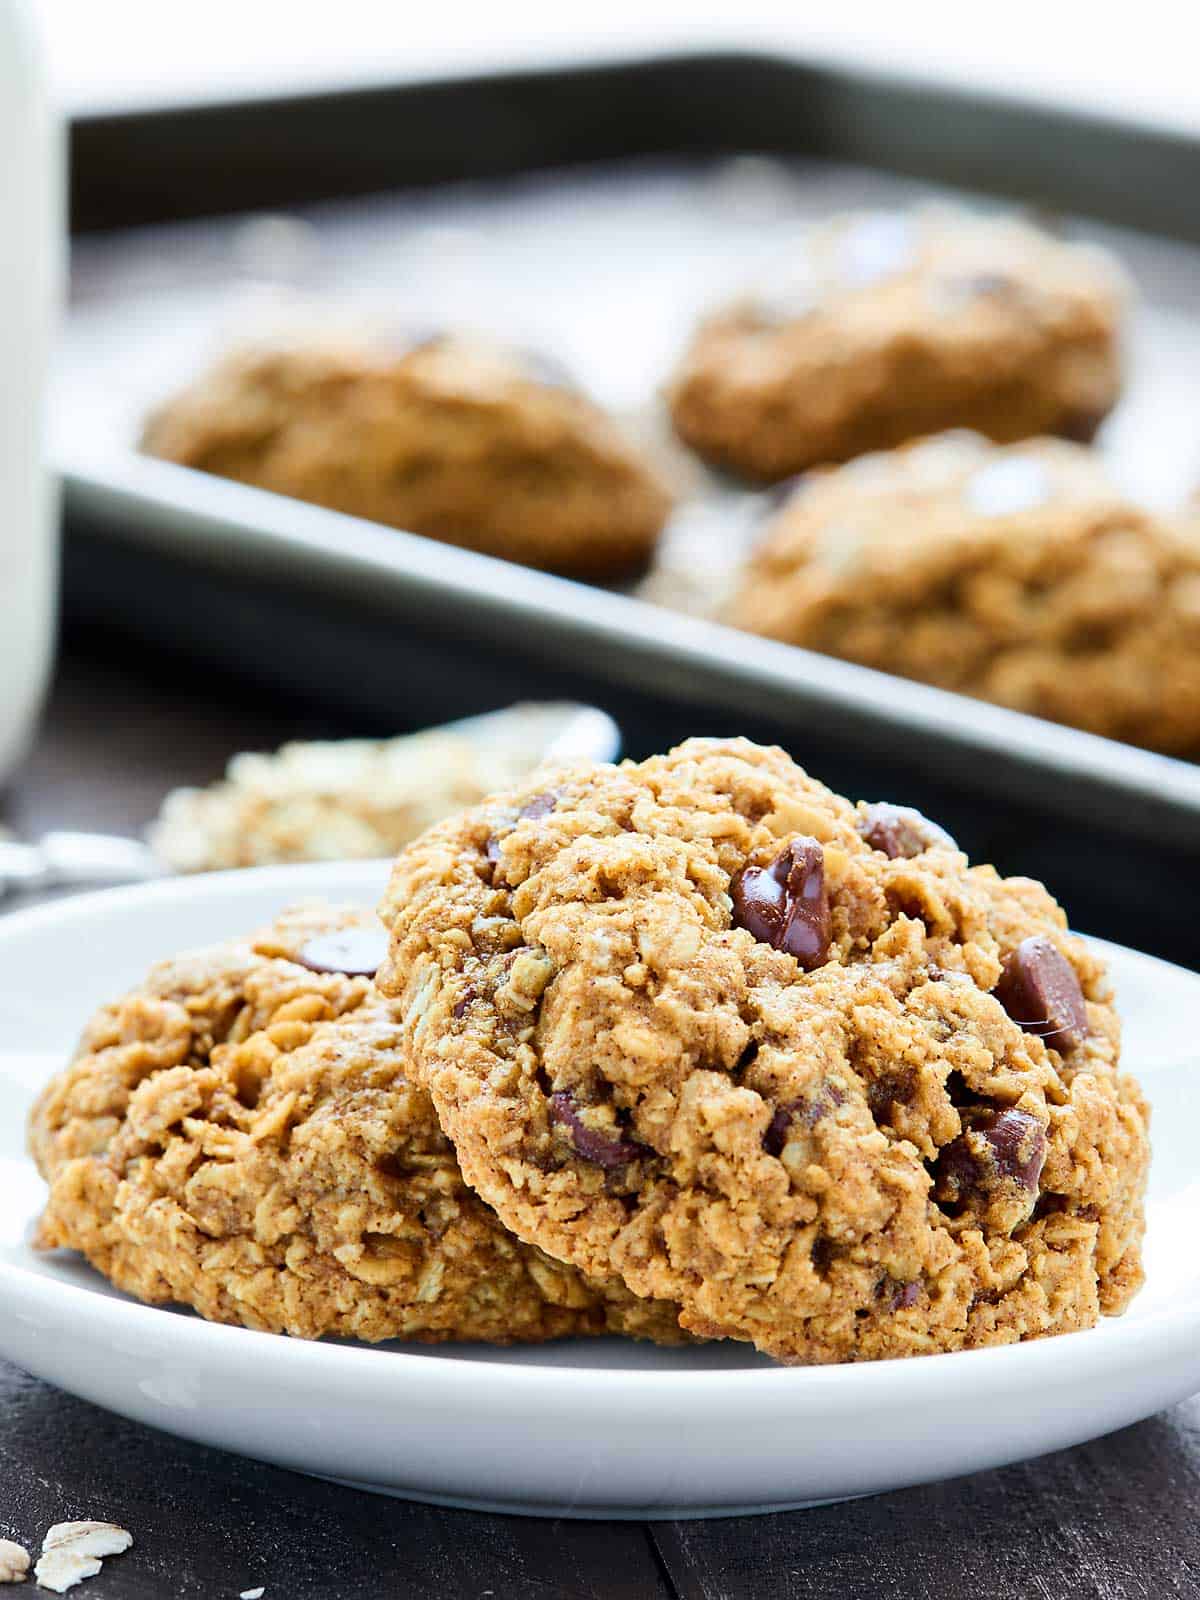 Oatmeal Chocolate Chip Cookies Recipe - Chewy & Easy!